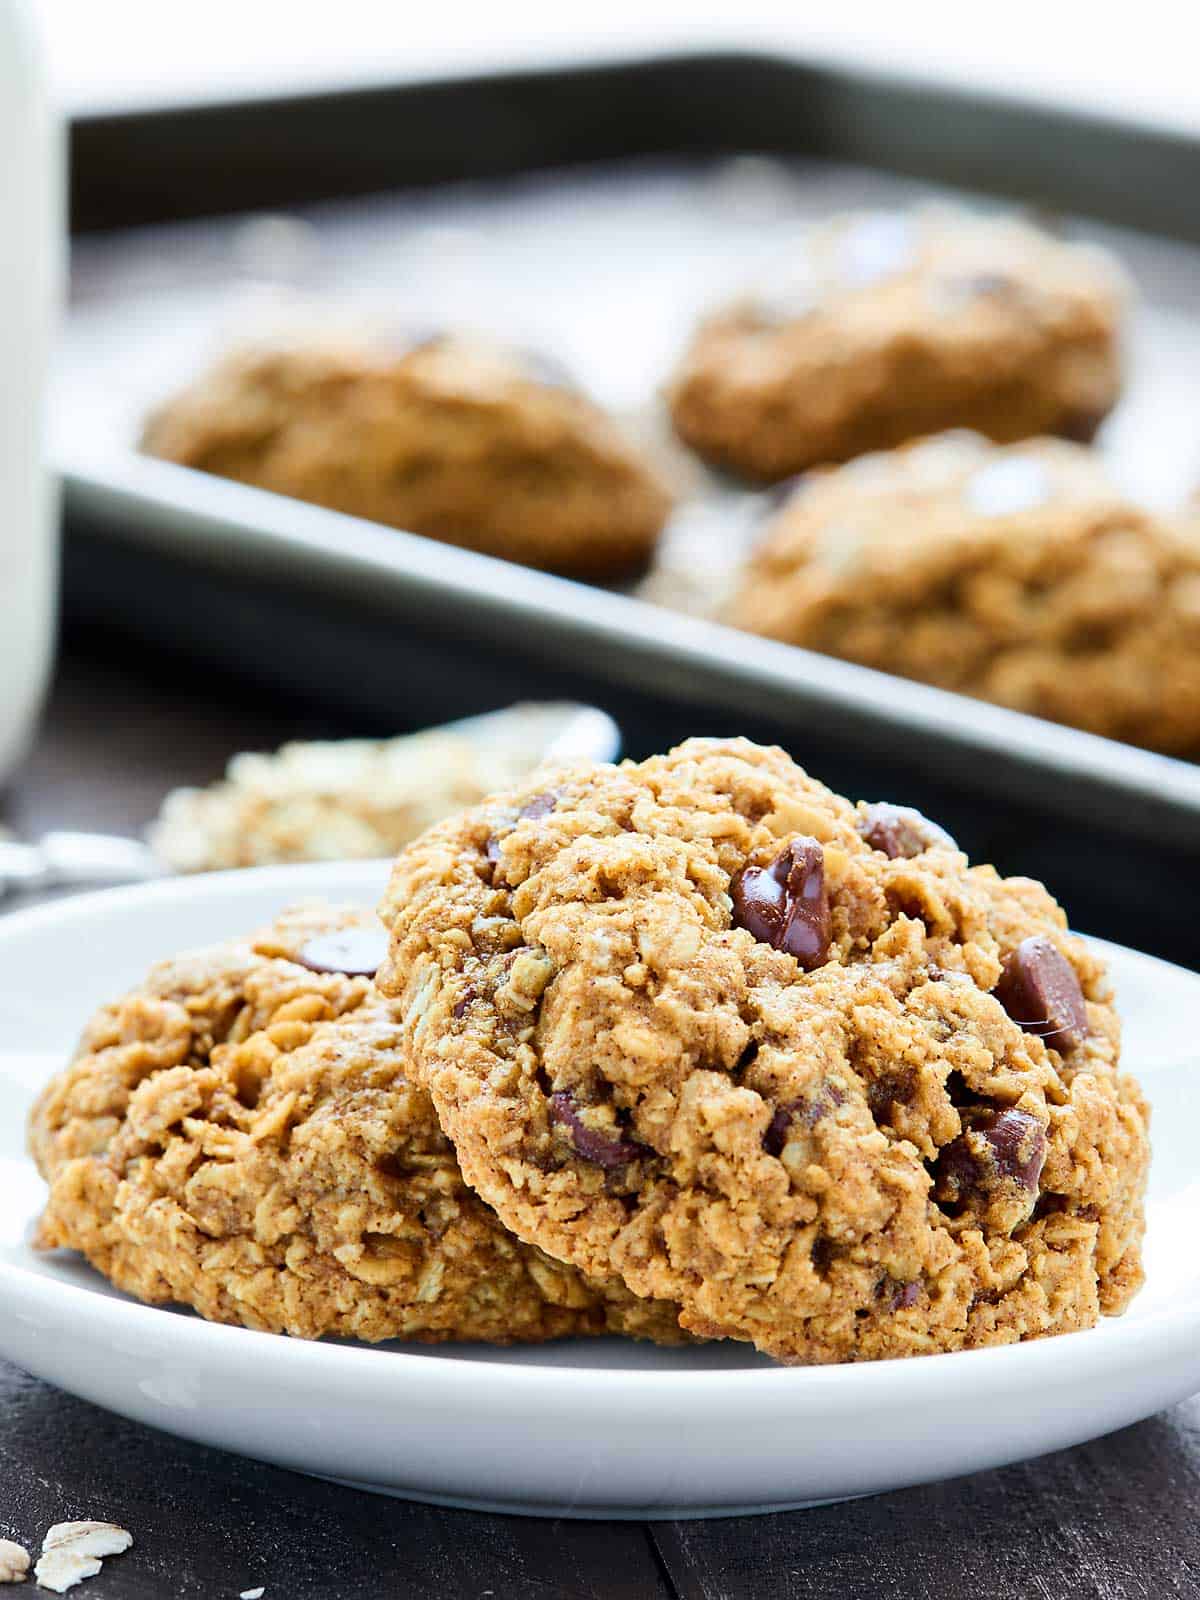 Oatmeal Chocolate Chip Cookies Recipe - Chewy & Easy!